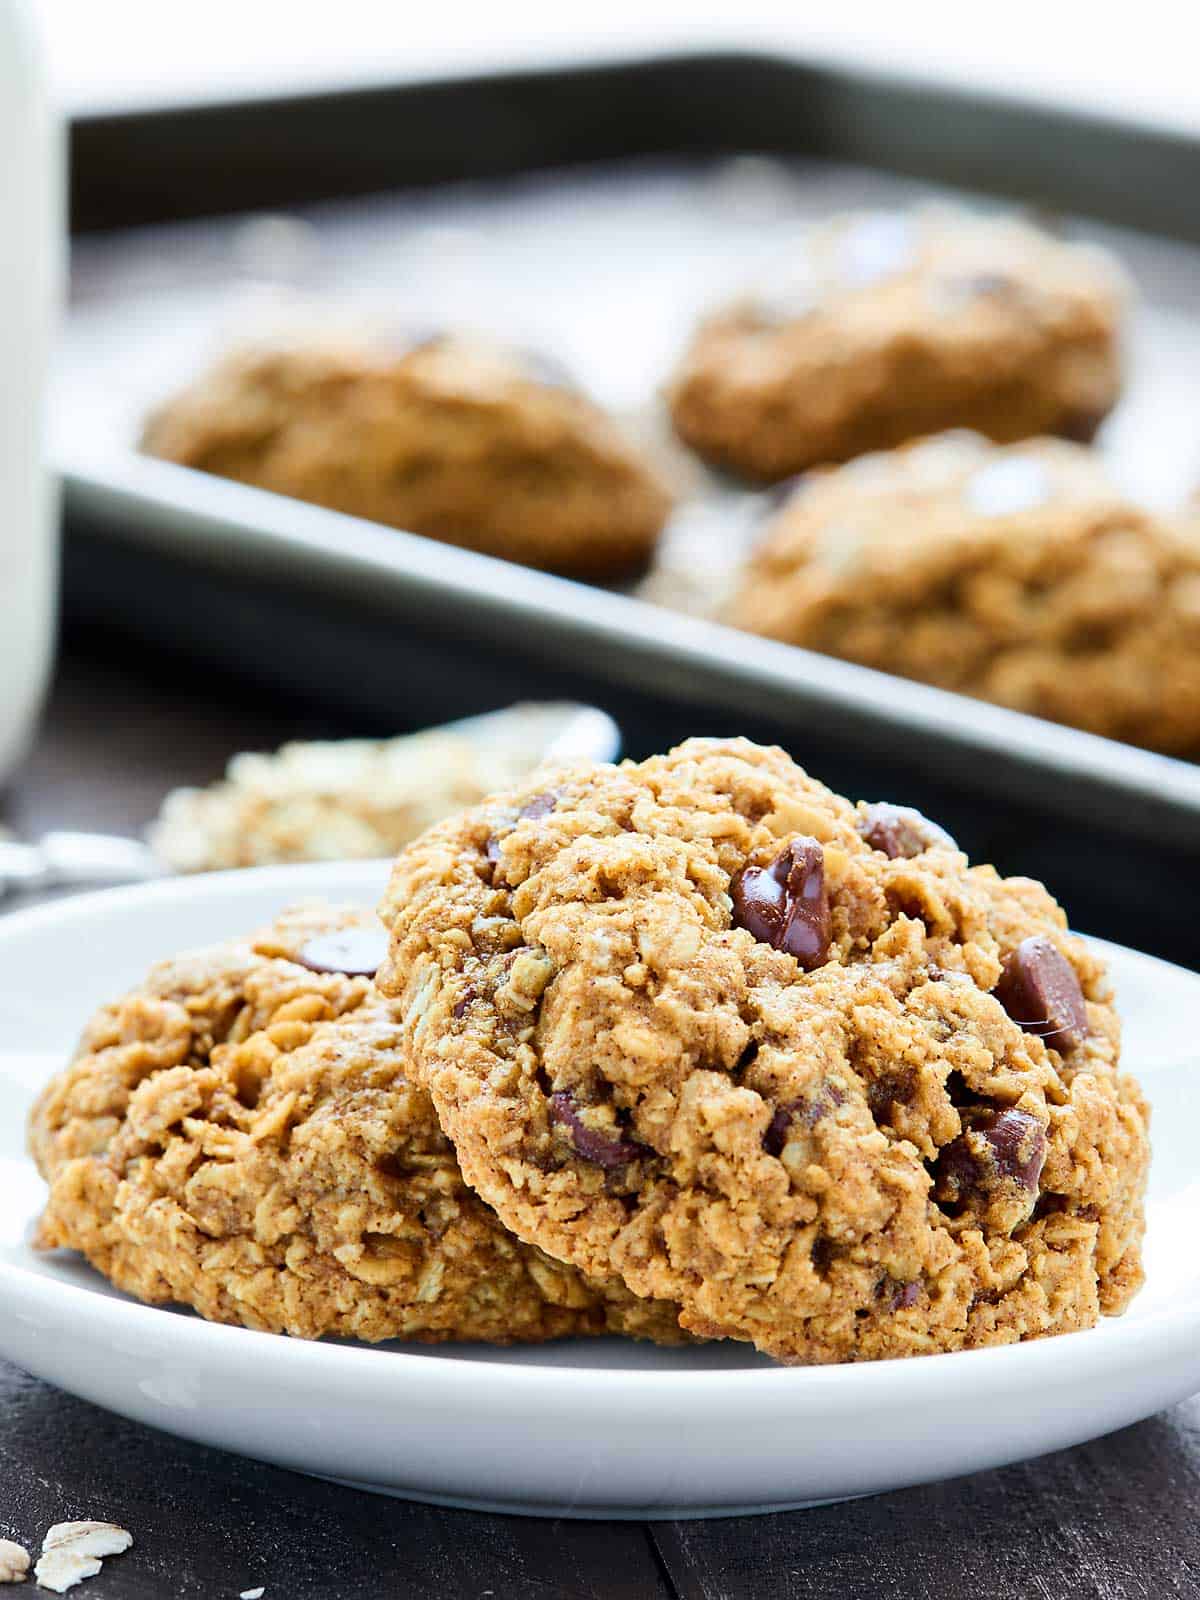 Oatmeal Chocolate Chip Cookies Recipe - Chewy & Easy!